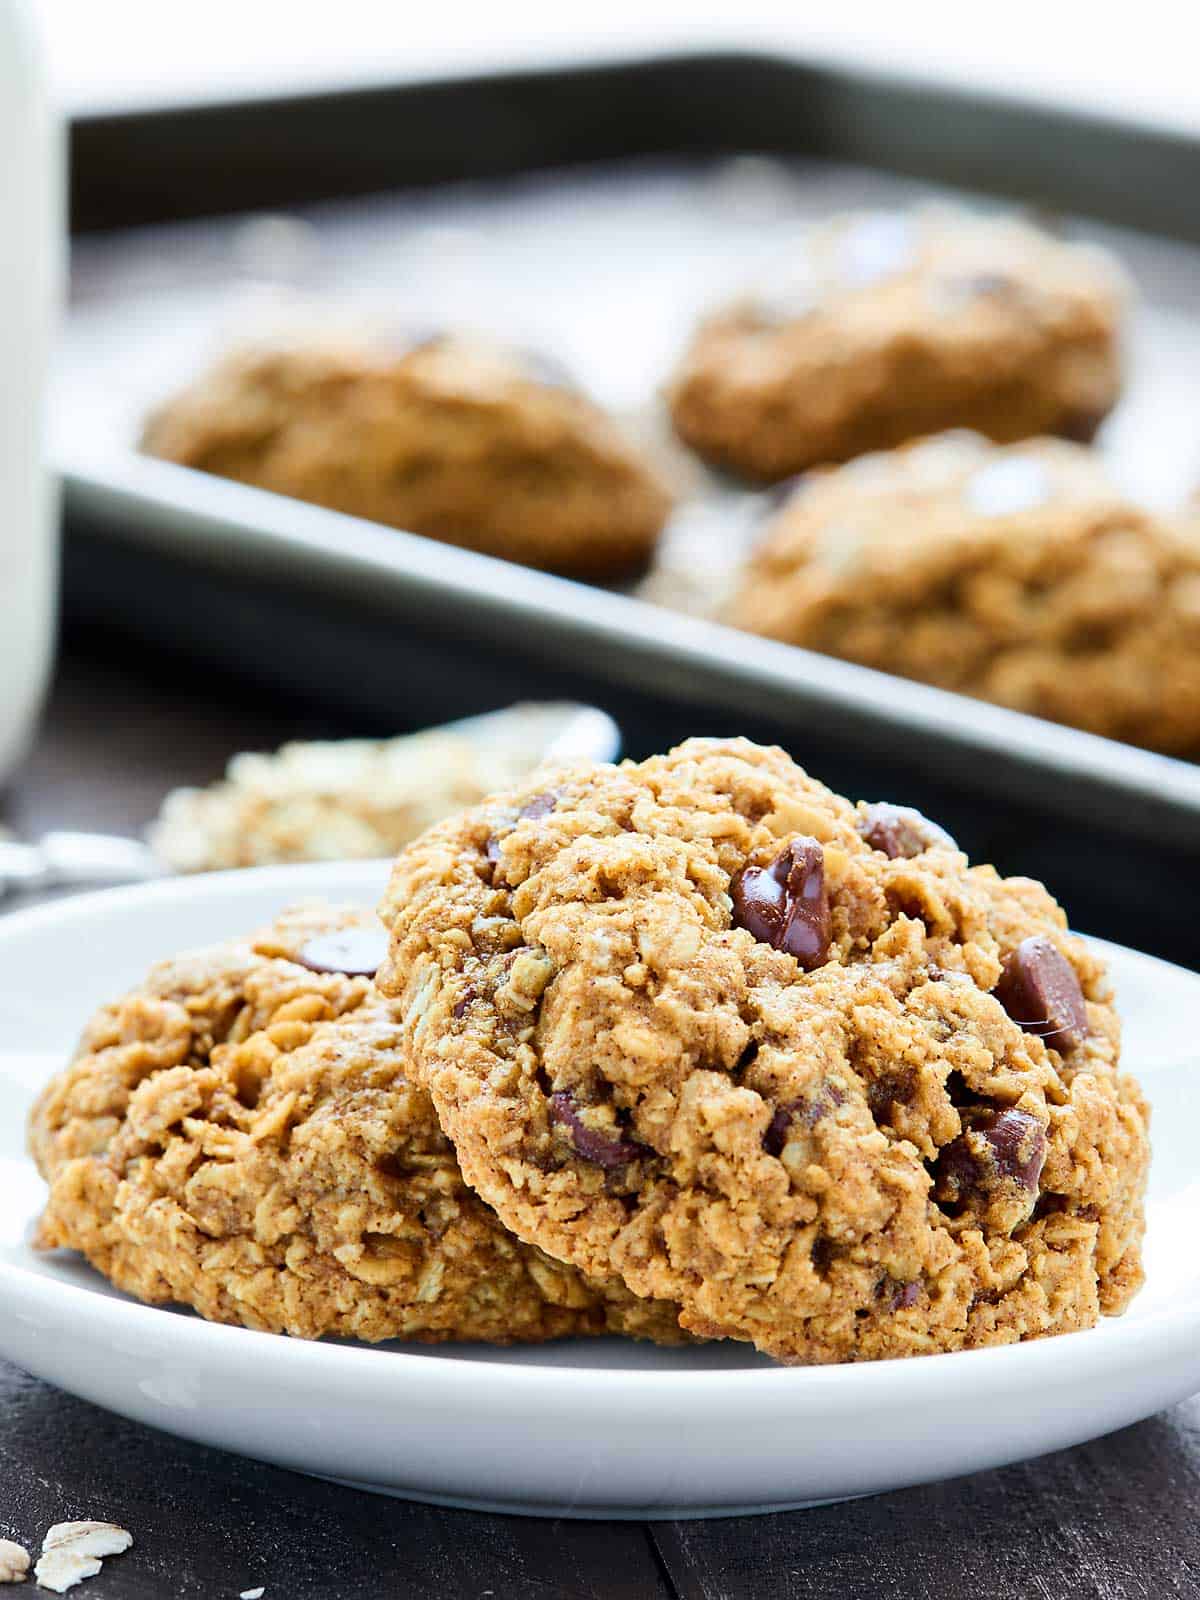 Oatmeal Chocolate Chip Cookies Recipe - Chewy & Easy!